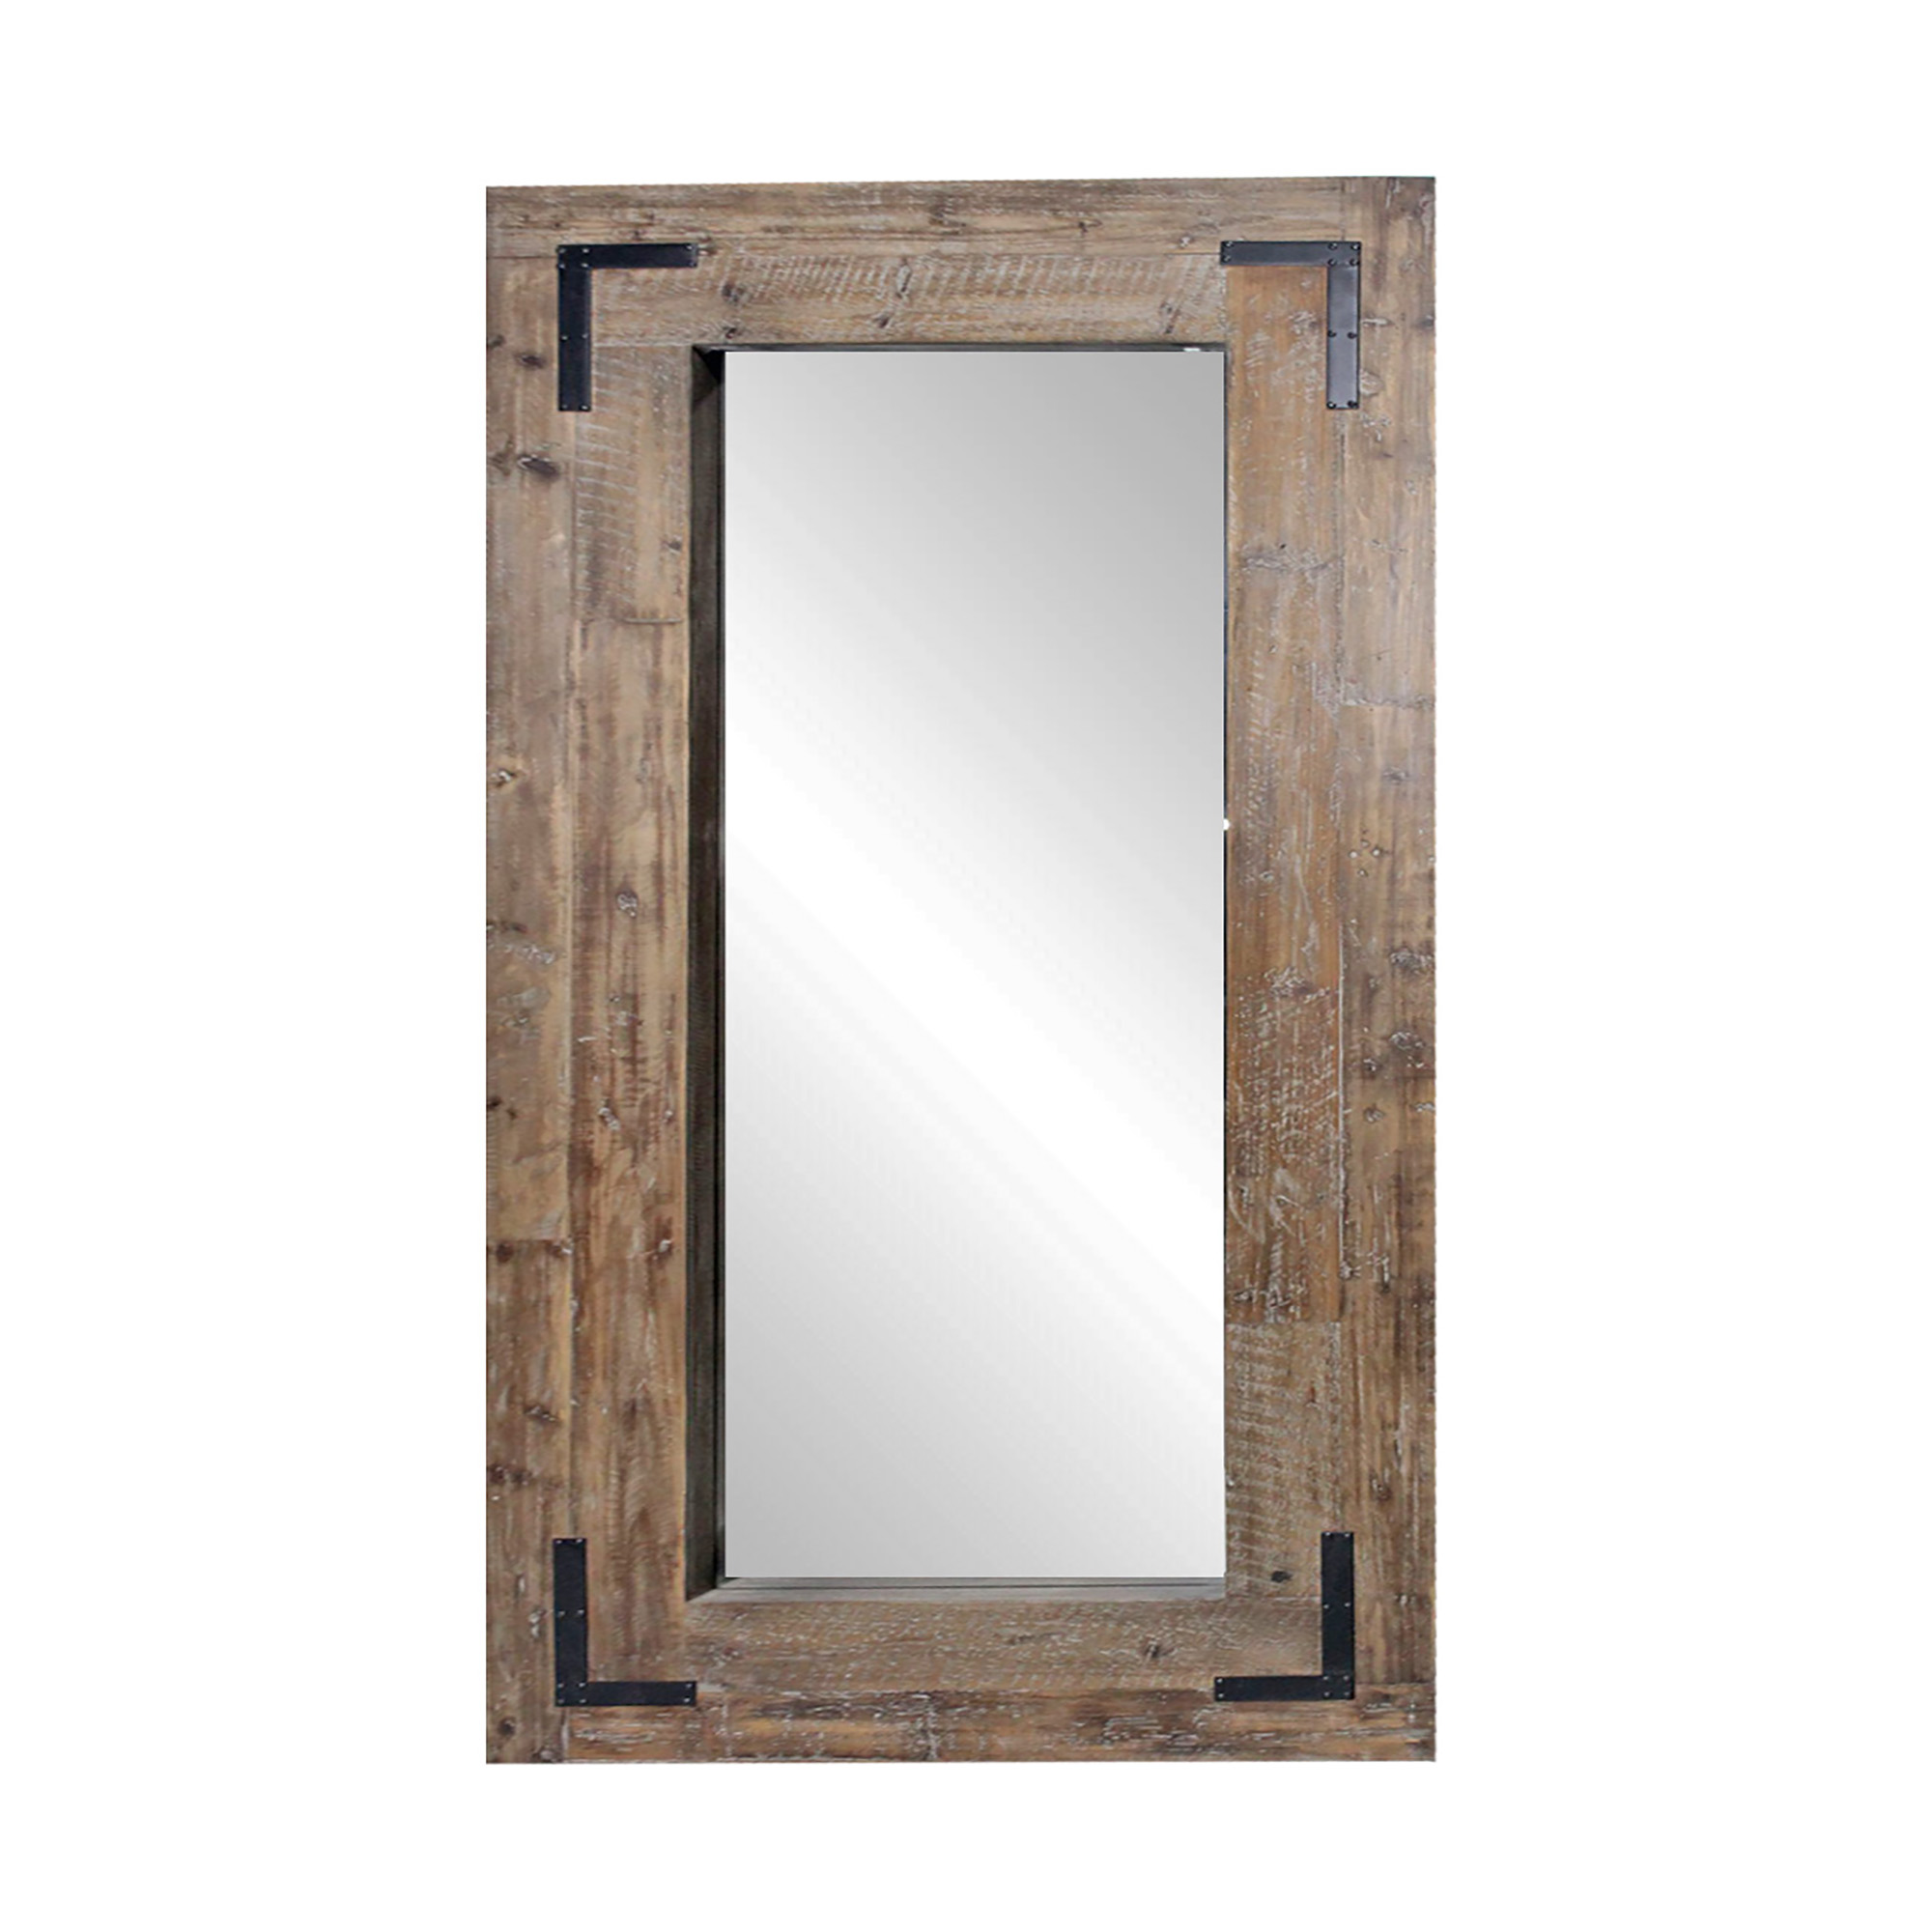 Rectangular Reclaimed Wood Finish Leaning Mirror with Black Metal Corner Accents